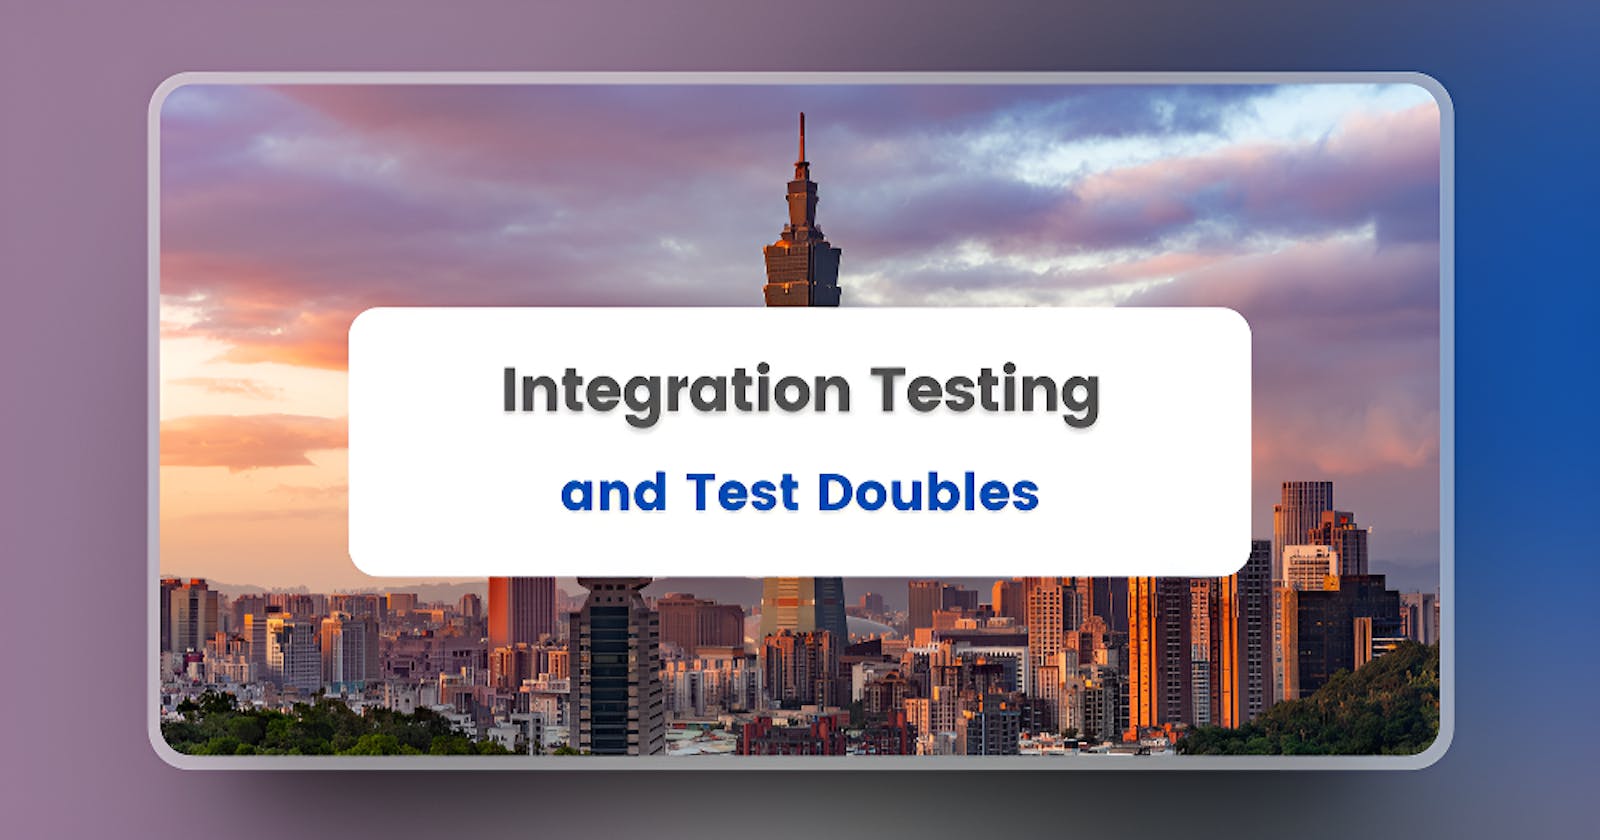 Introduction to Integration Testing and Test Doubles